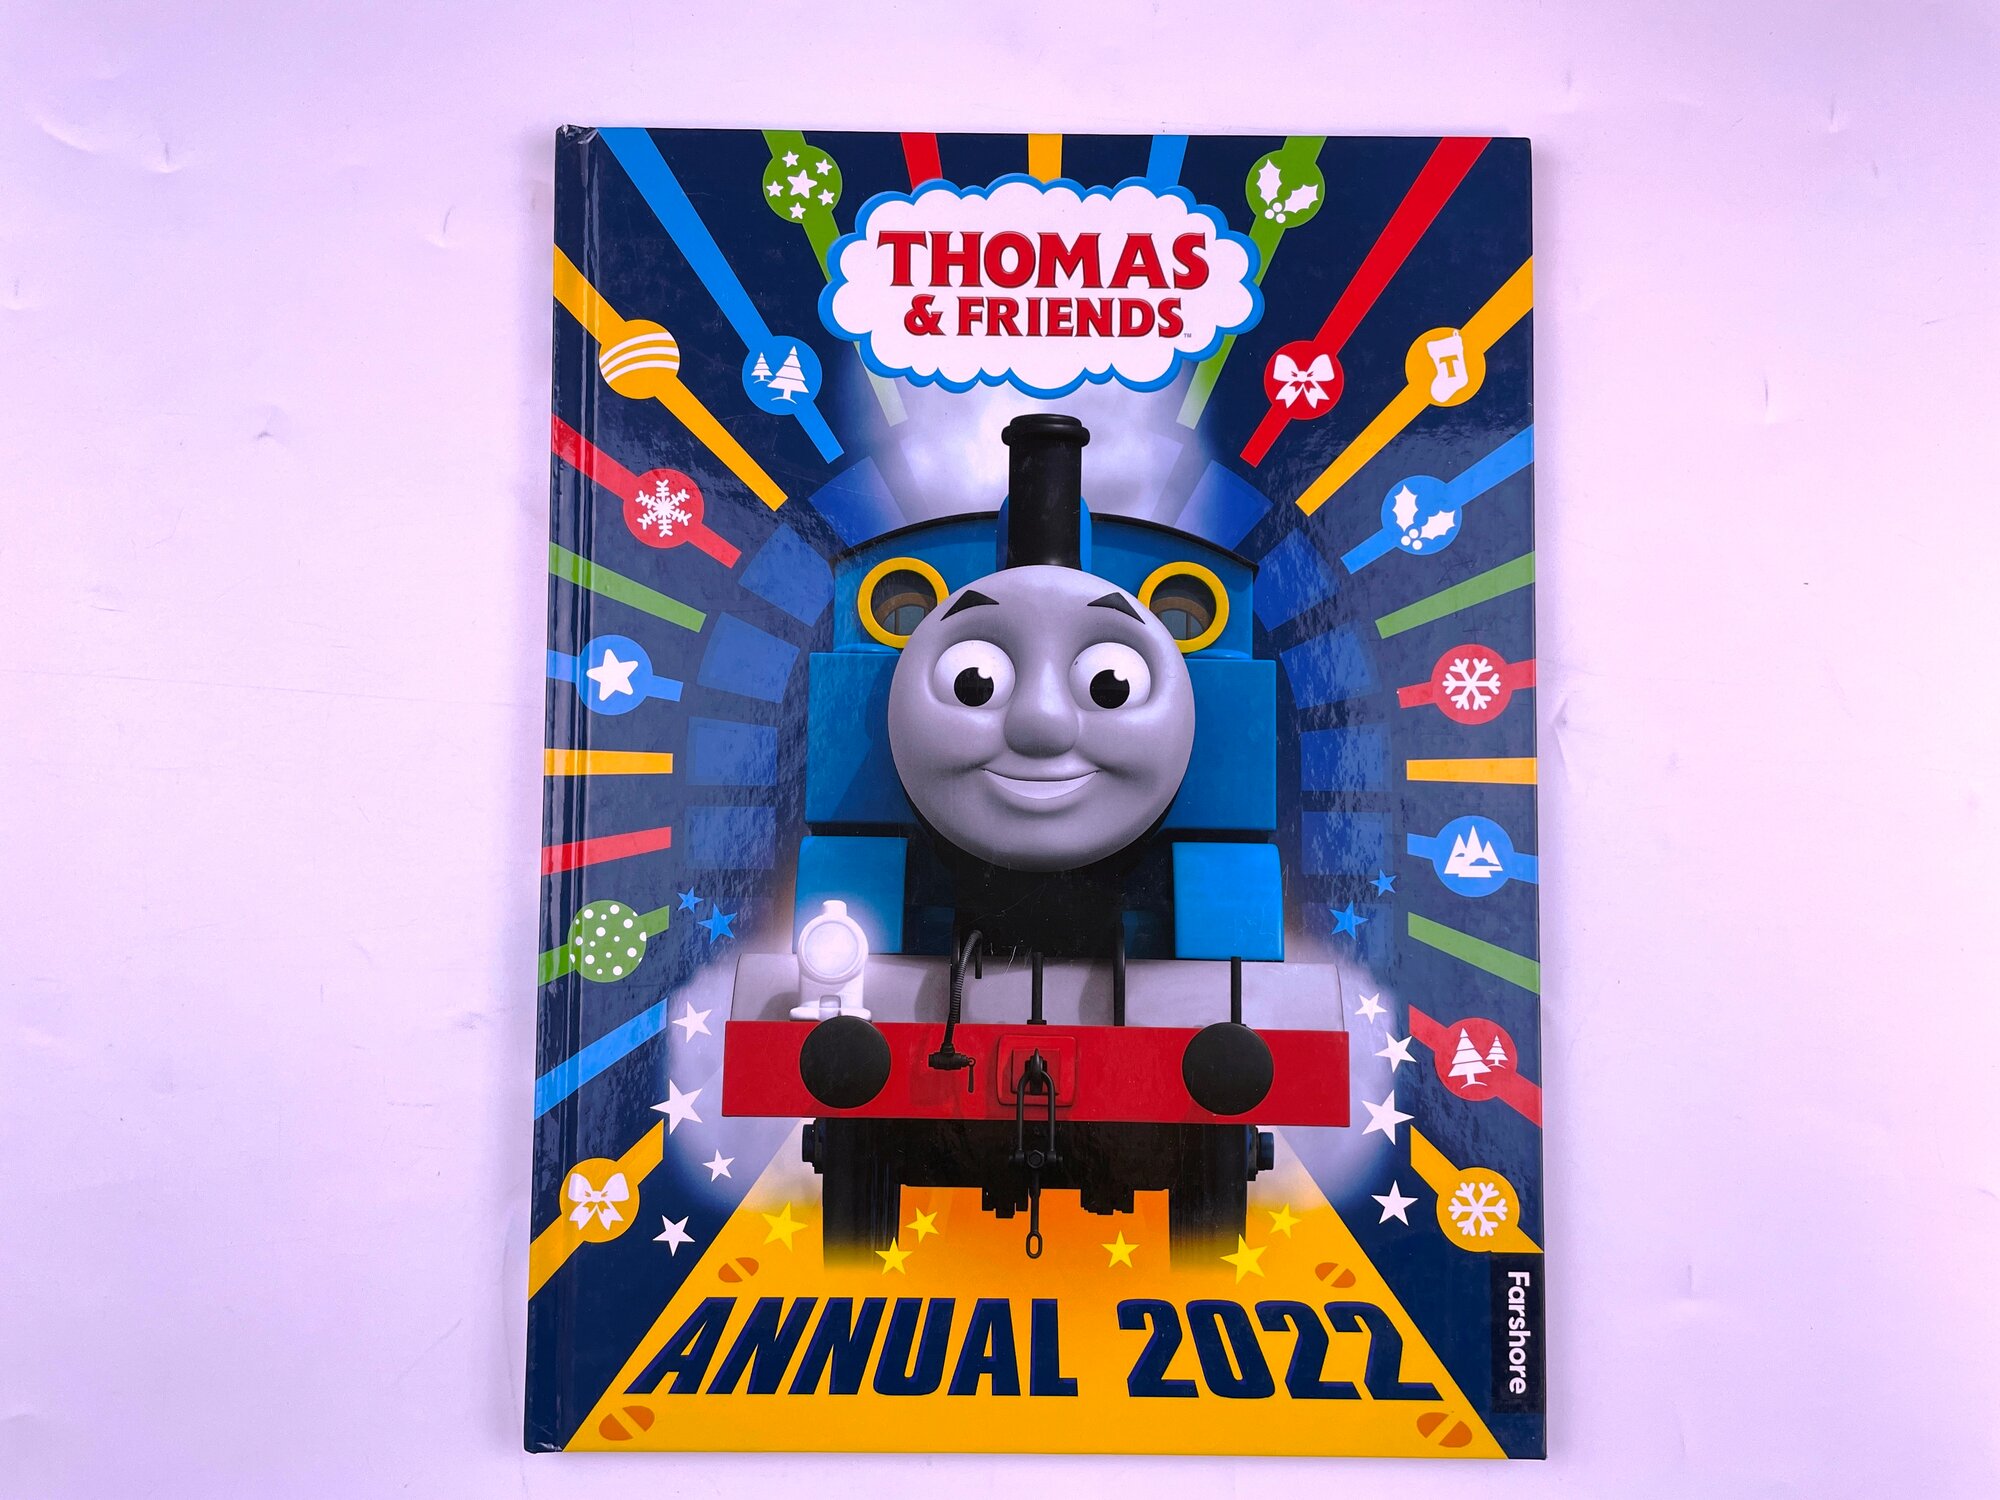 Thomas & Friends: Annual 2022: Toot! Toot!